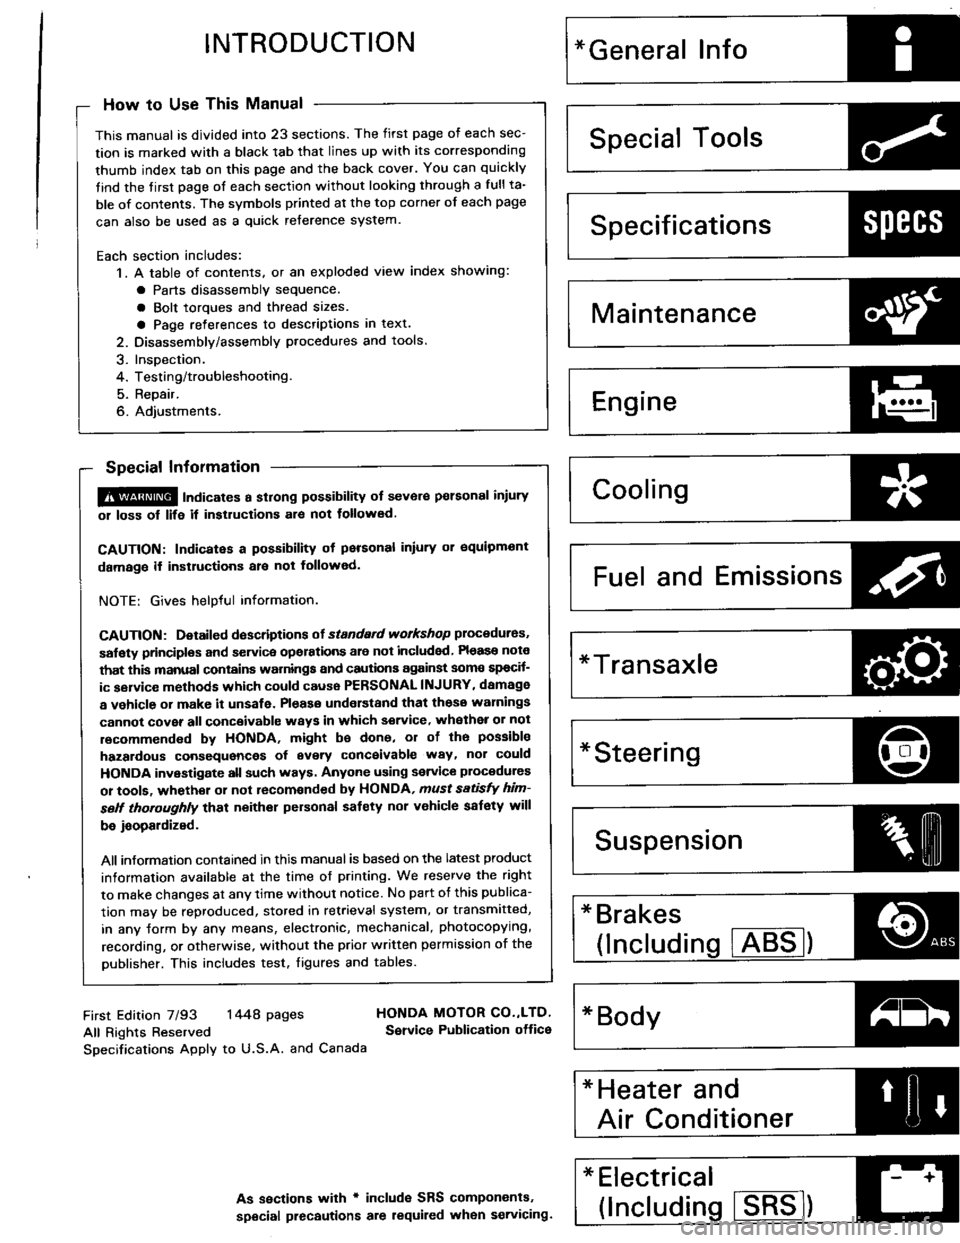 HONDA INTEGRA 1994 4.G Workshop Manual INTRODUCTION
How to Use This Manual
This manual is divided into 23 sections. The first page of each sec-
tion is marked with a black tab that lines up with its corresponding
thumb index tab on this pa